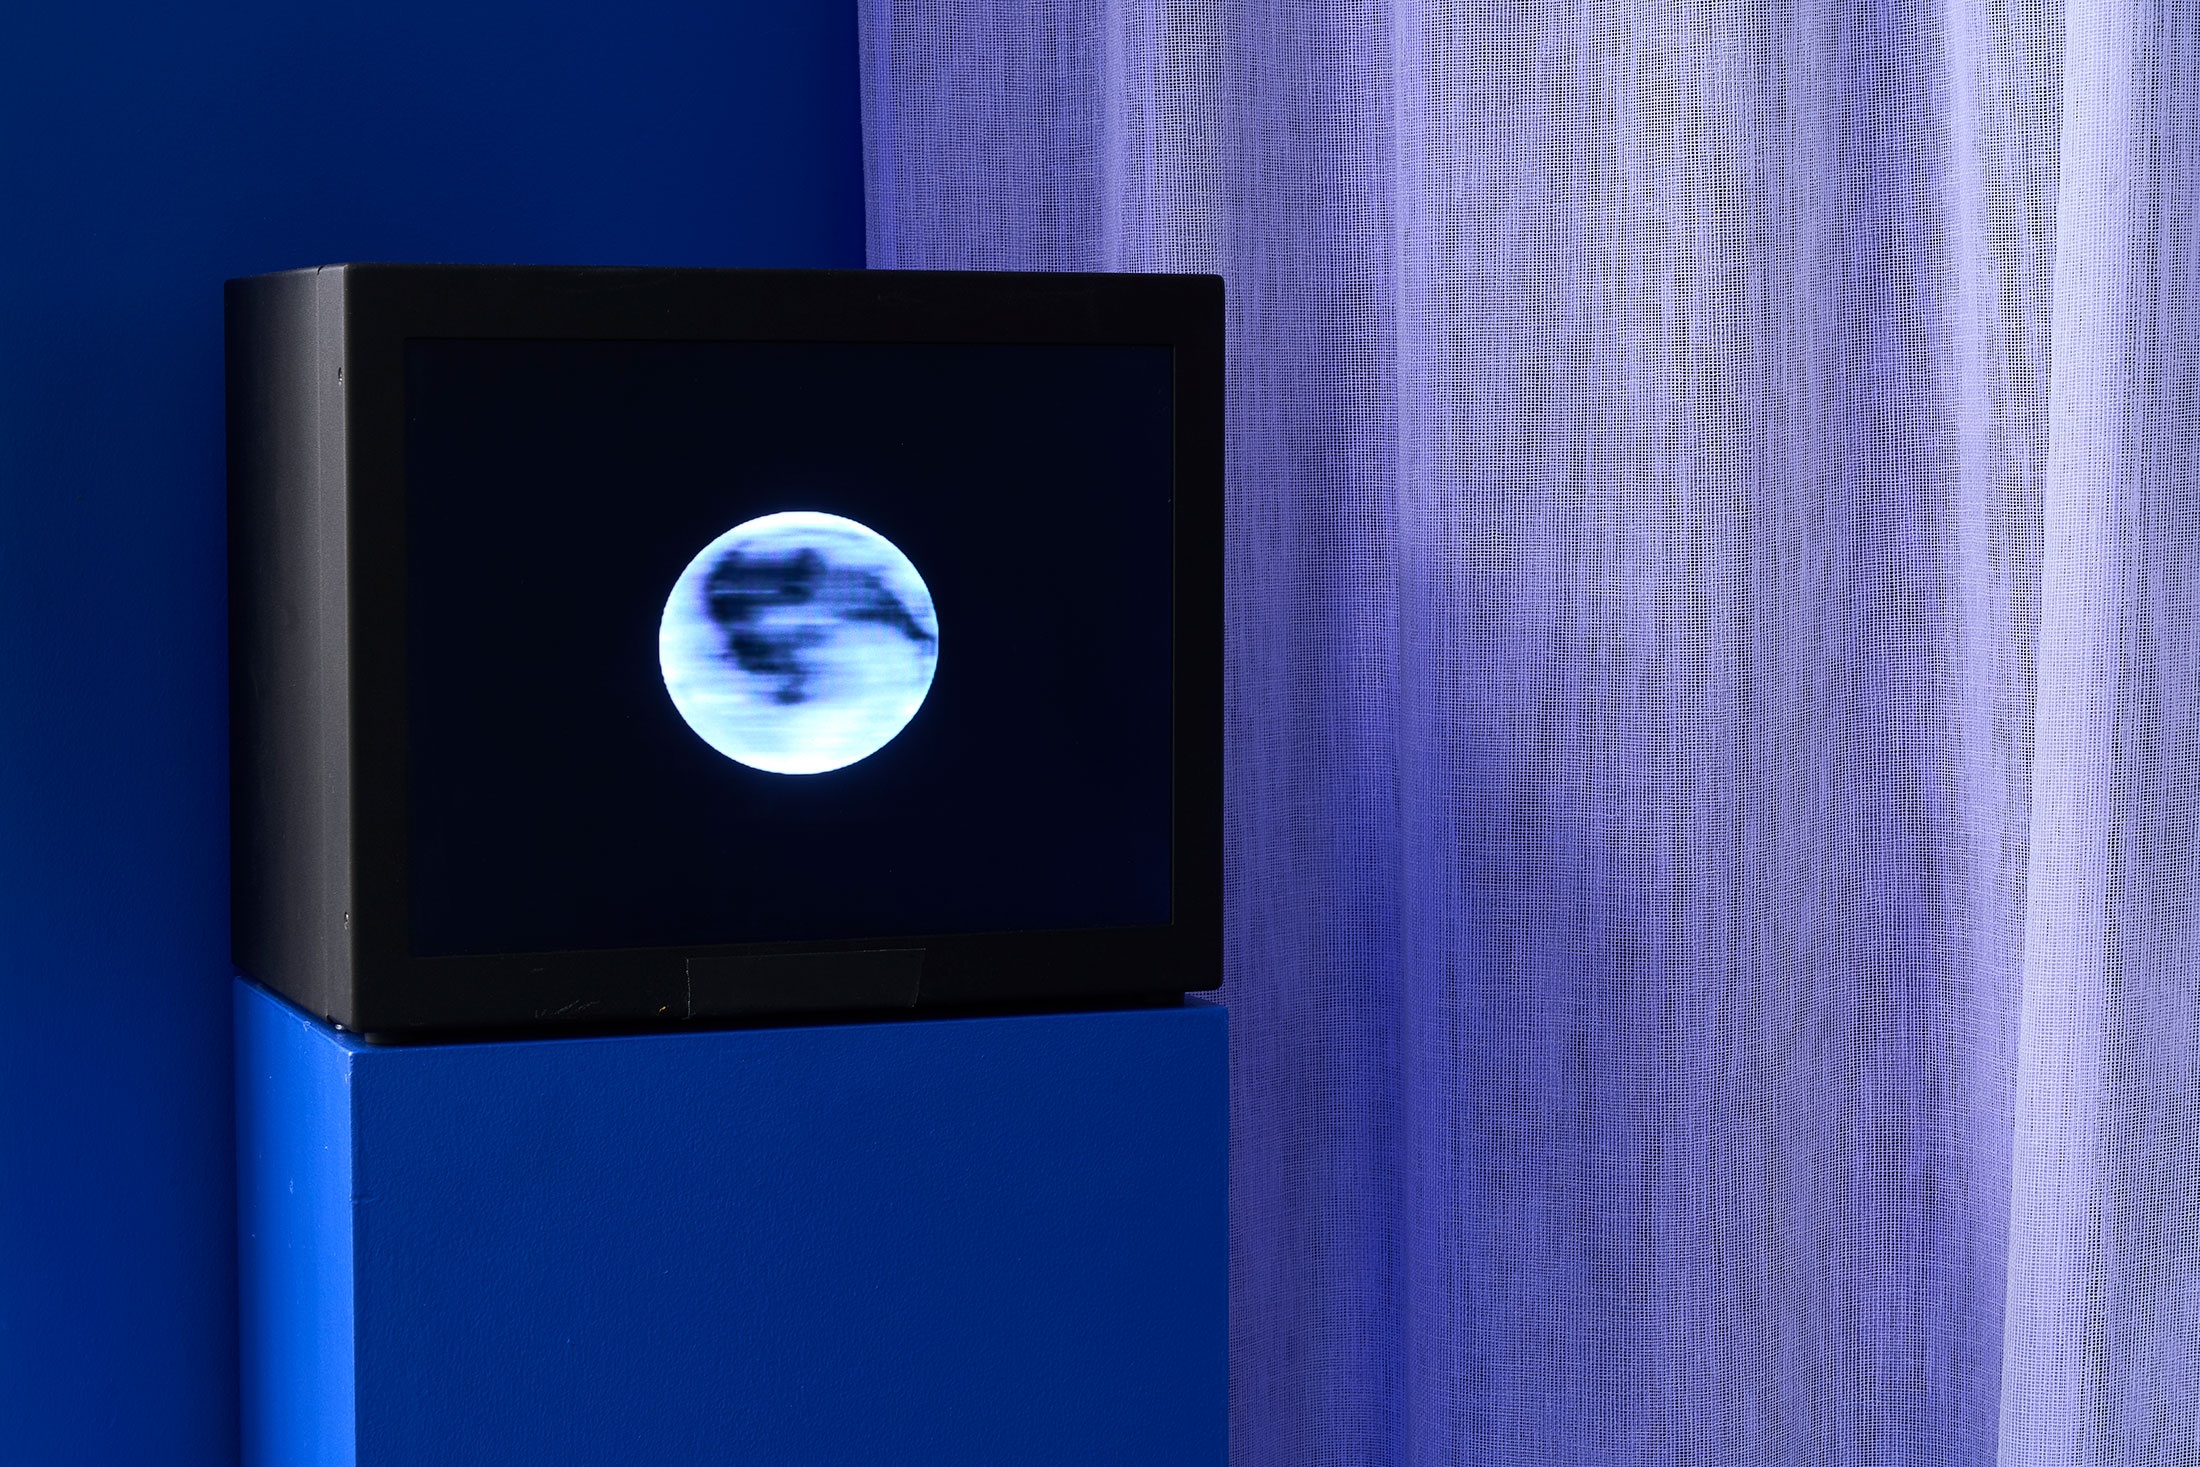 Installation photograph from the ‘Lunar Maria Chorus’ exhibition in A4’s Goods project space. On the left, a black box on a blue plinth displays a video of the moon rotating. On the right, a curtain of white gauze.
